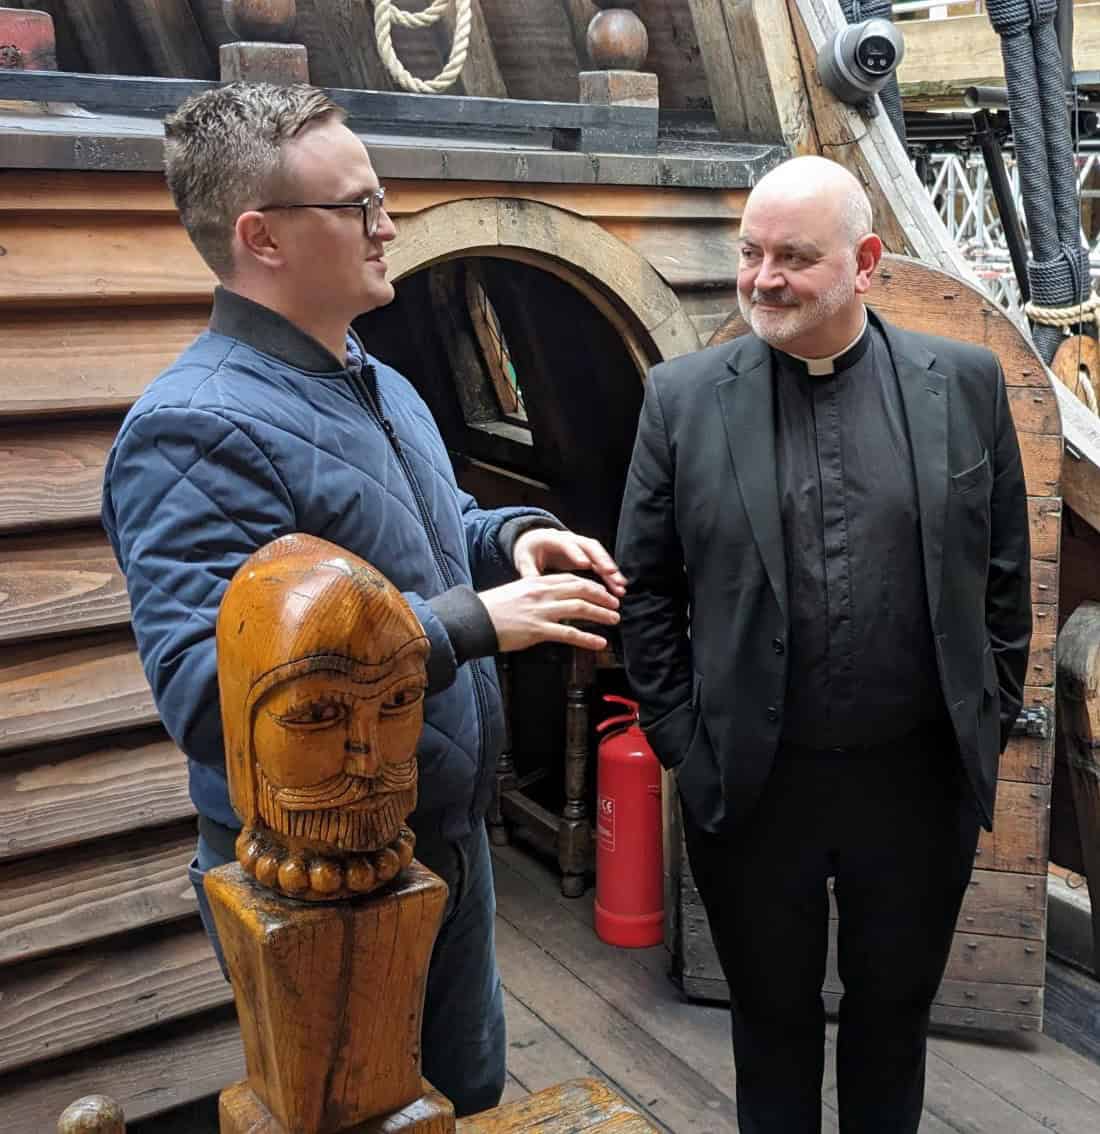 The Dean of Southwark Cathedral enjoys a tour of The Golden Hinde